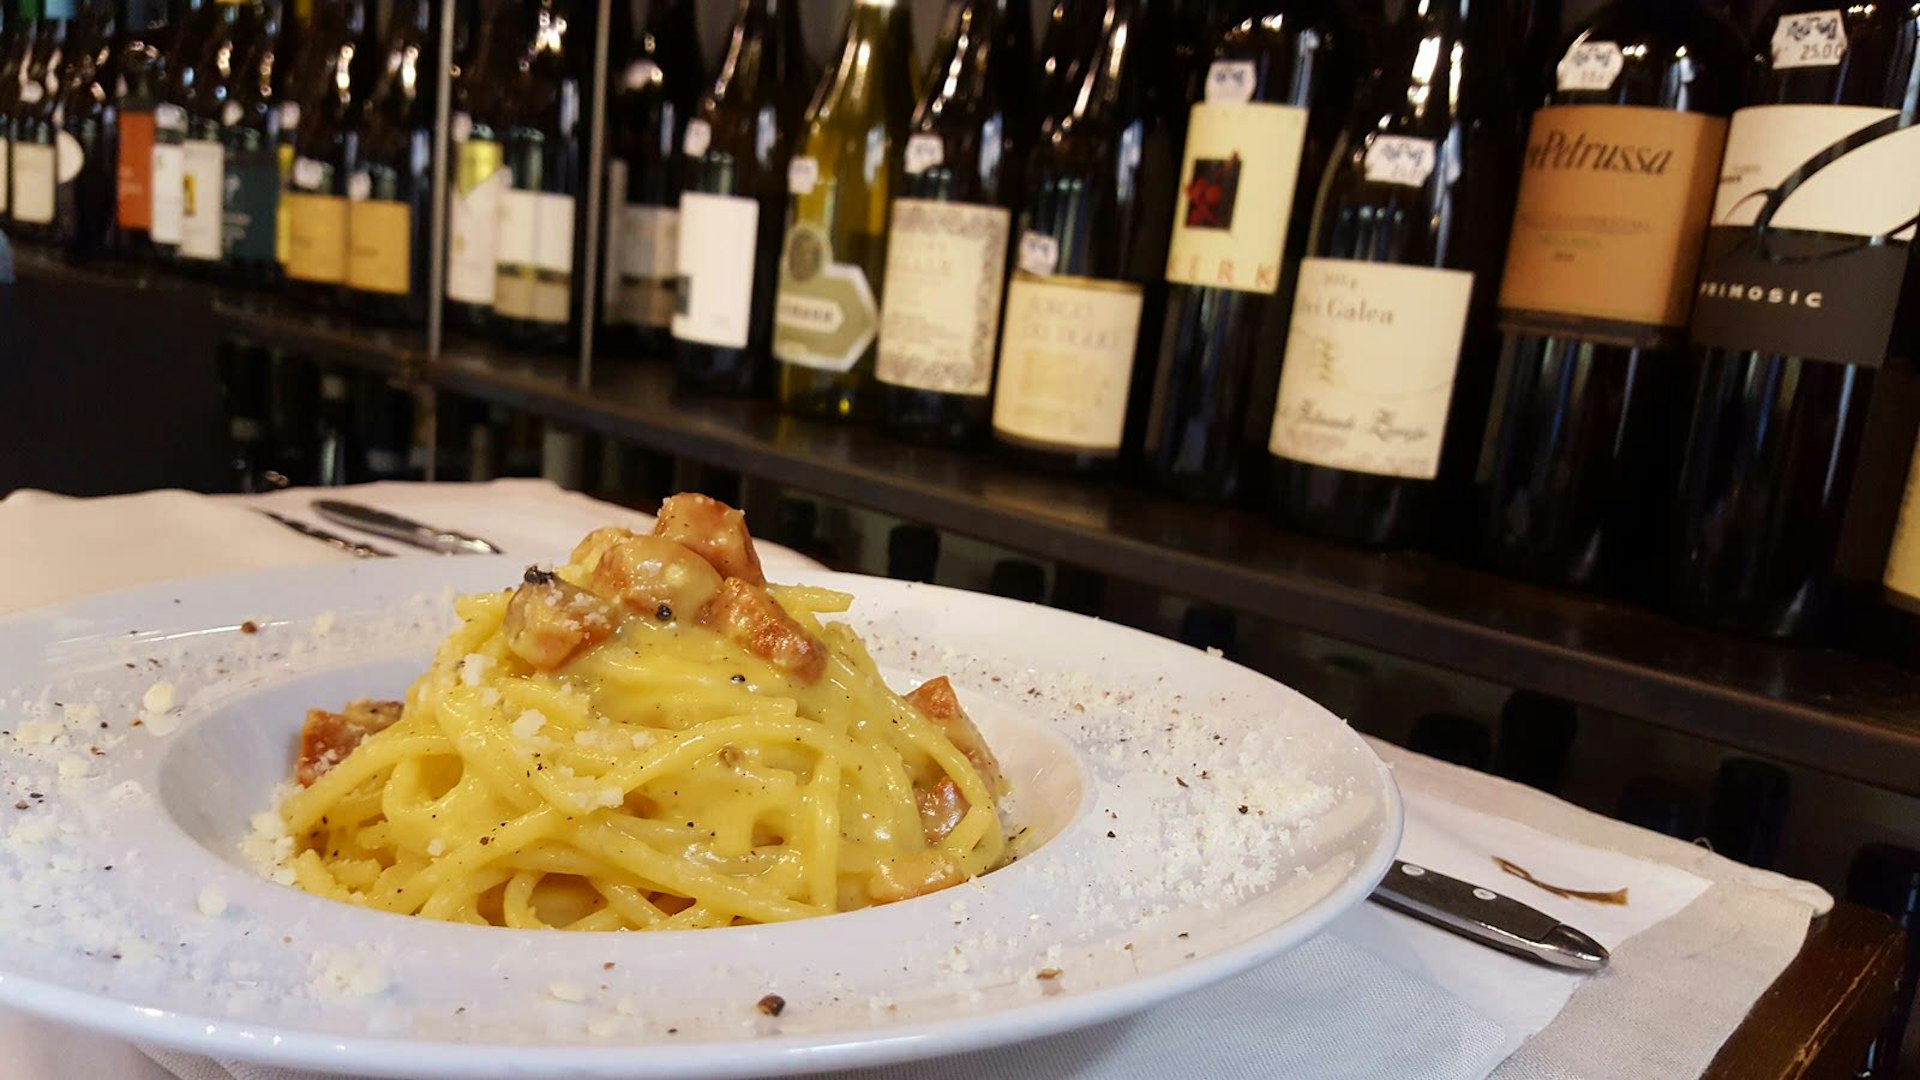 The dreamy carbonara at Roscioli has all the right ingredients